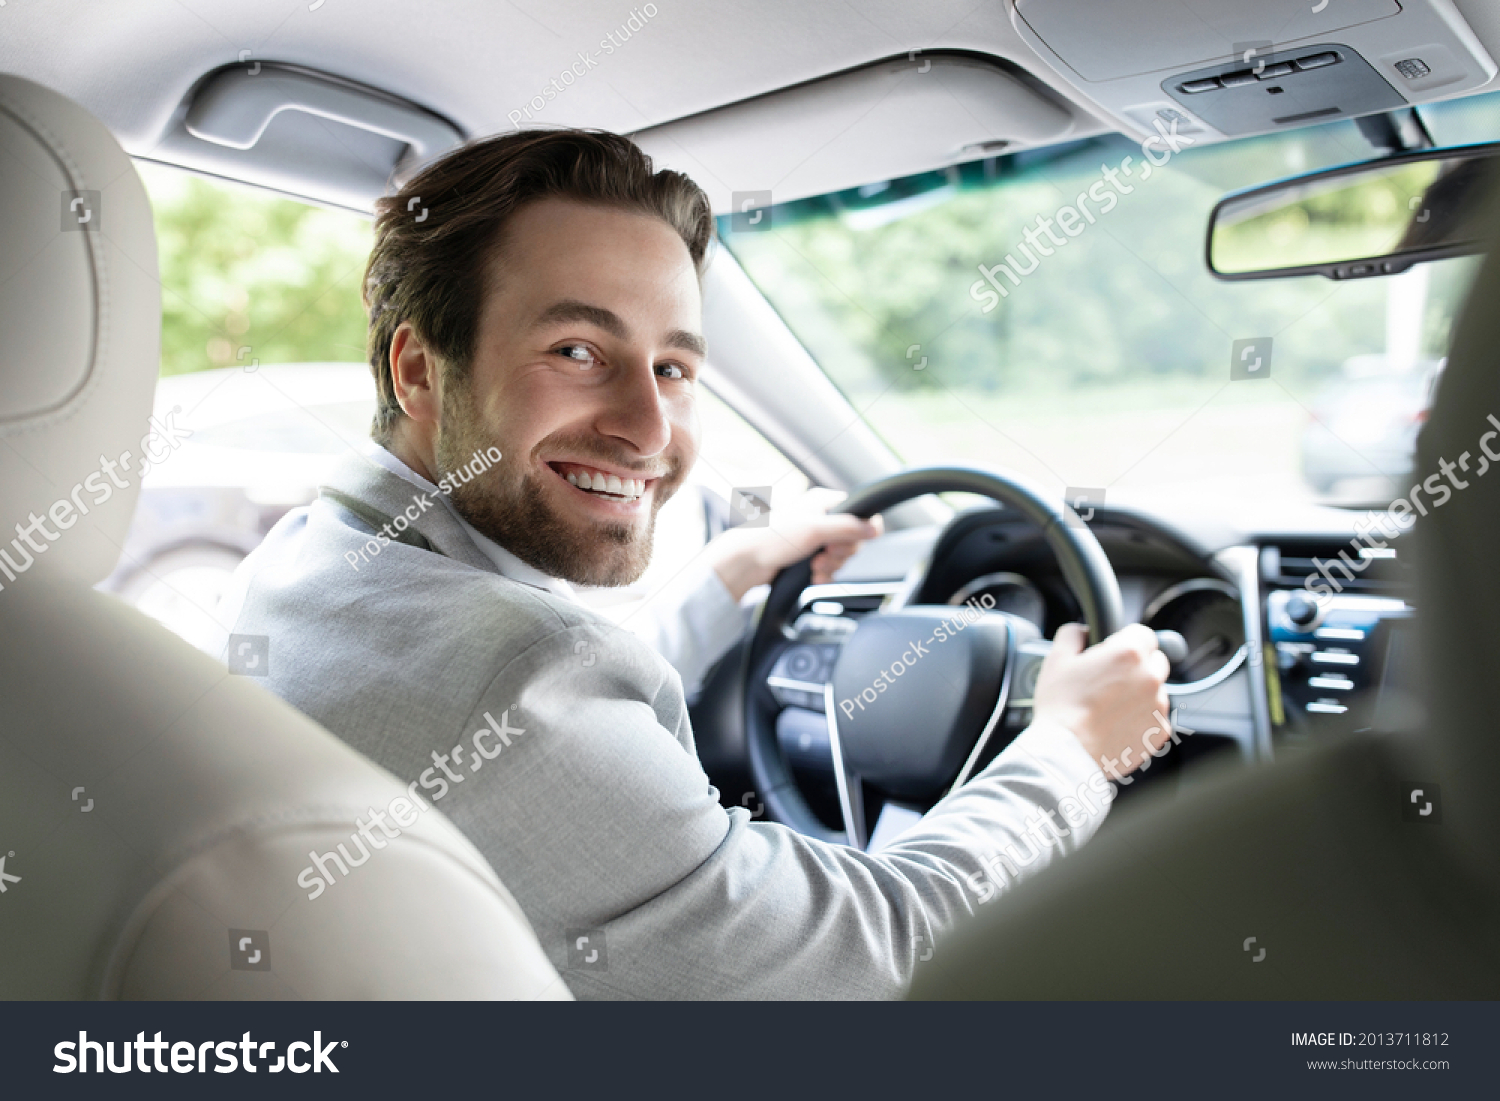 Lifestyle travel tourism positivity, transportation. Successful man sits at steering wheel of prestigious car. Portrait of handsome guy in suit, smiling driving auto, turns to passenger back seat #2013711812